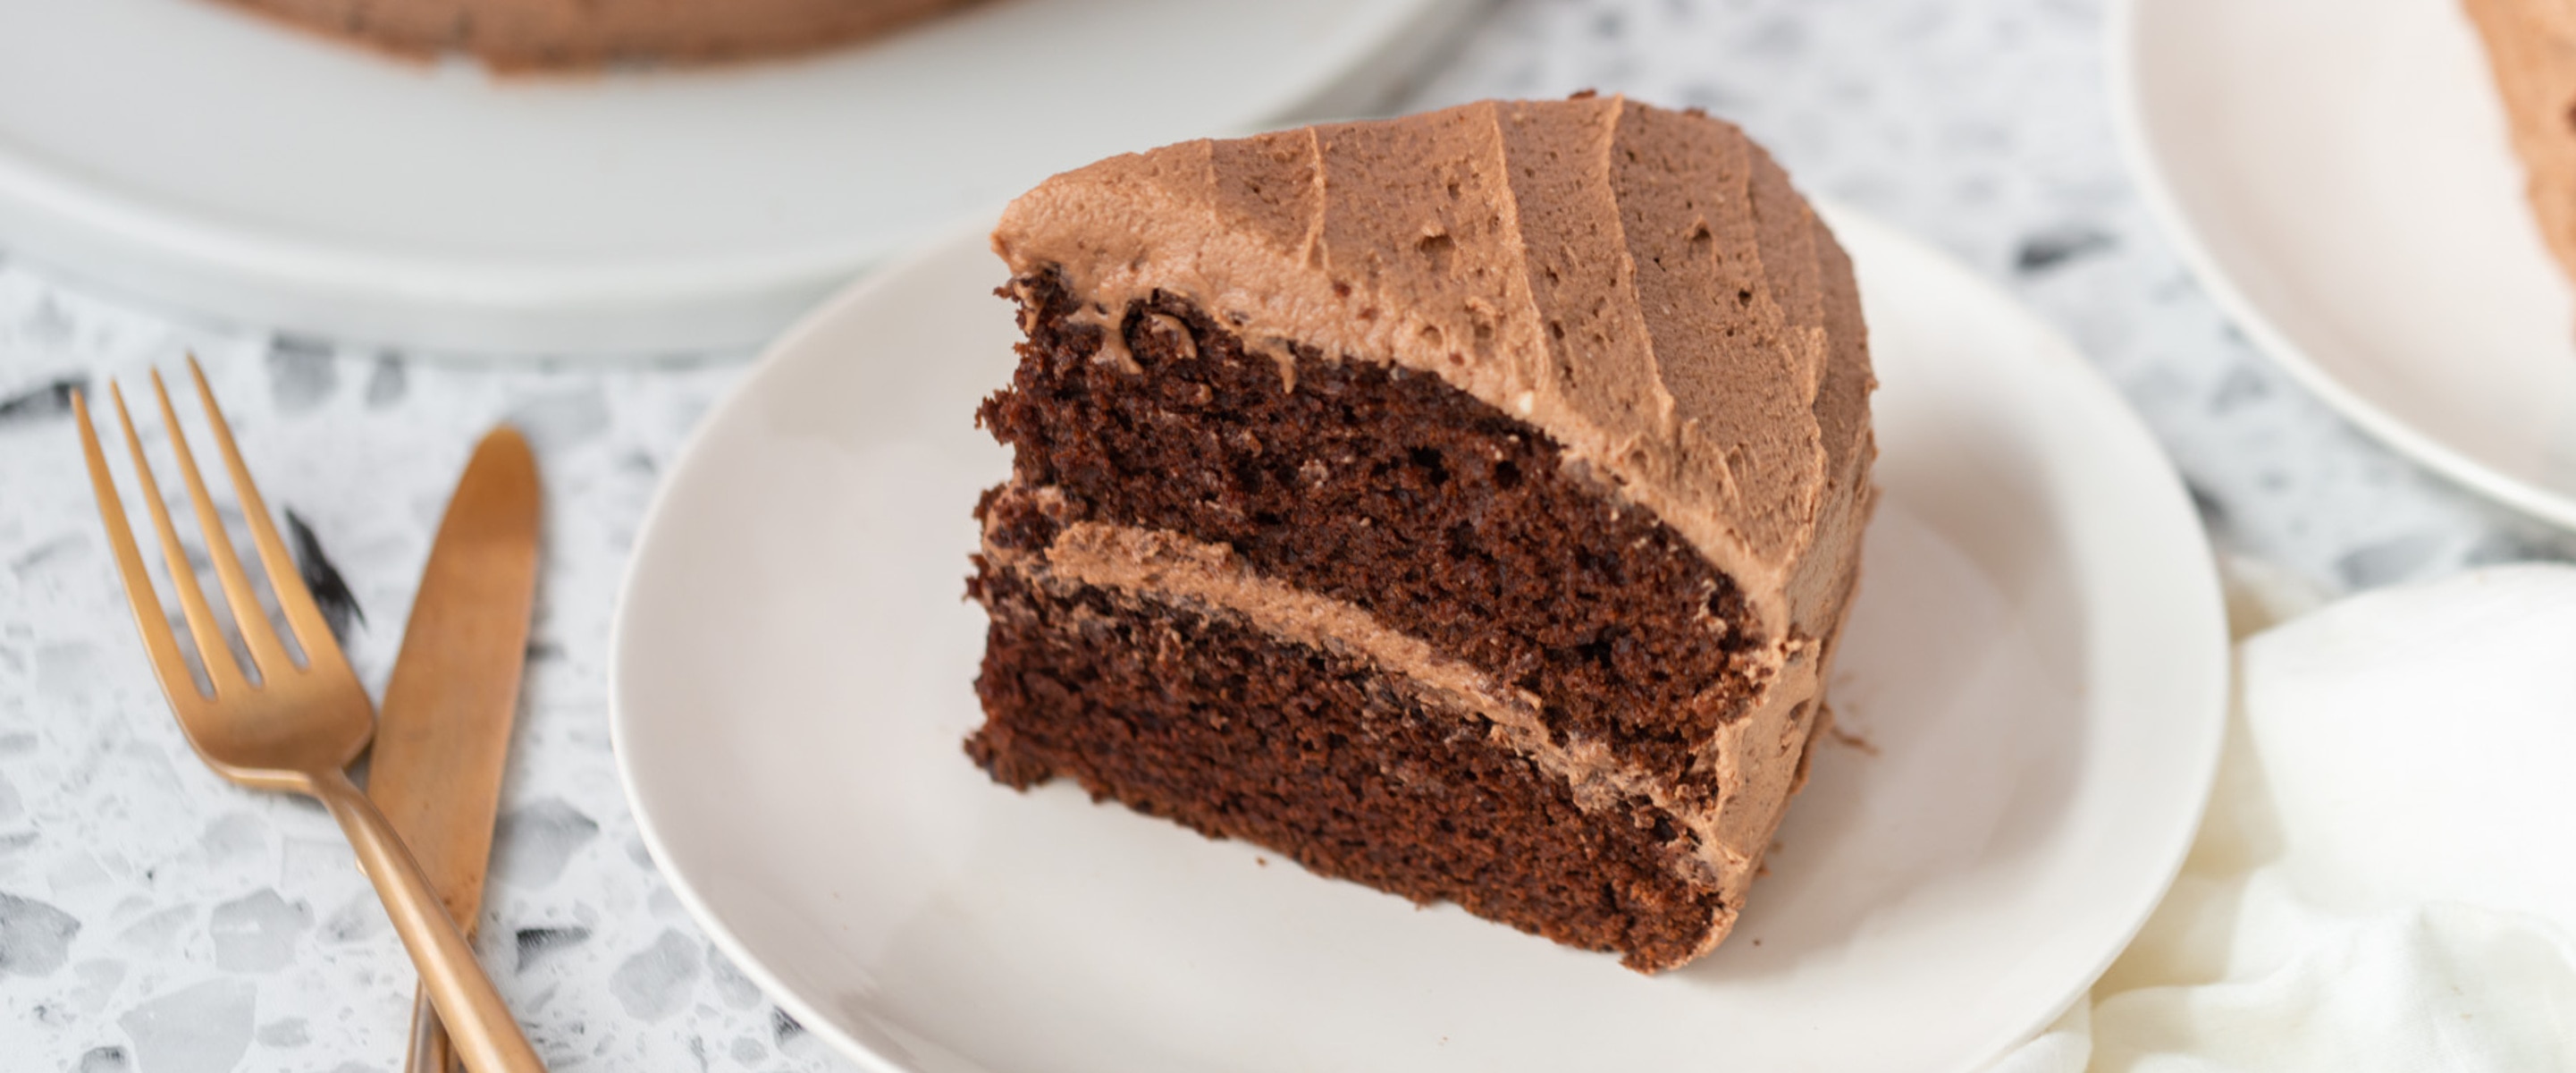 First, the Vegan Carrot Cake. Now, We Have the Famous Chocolate Cake Recipe, Too.